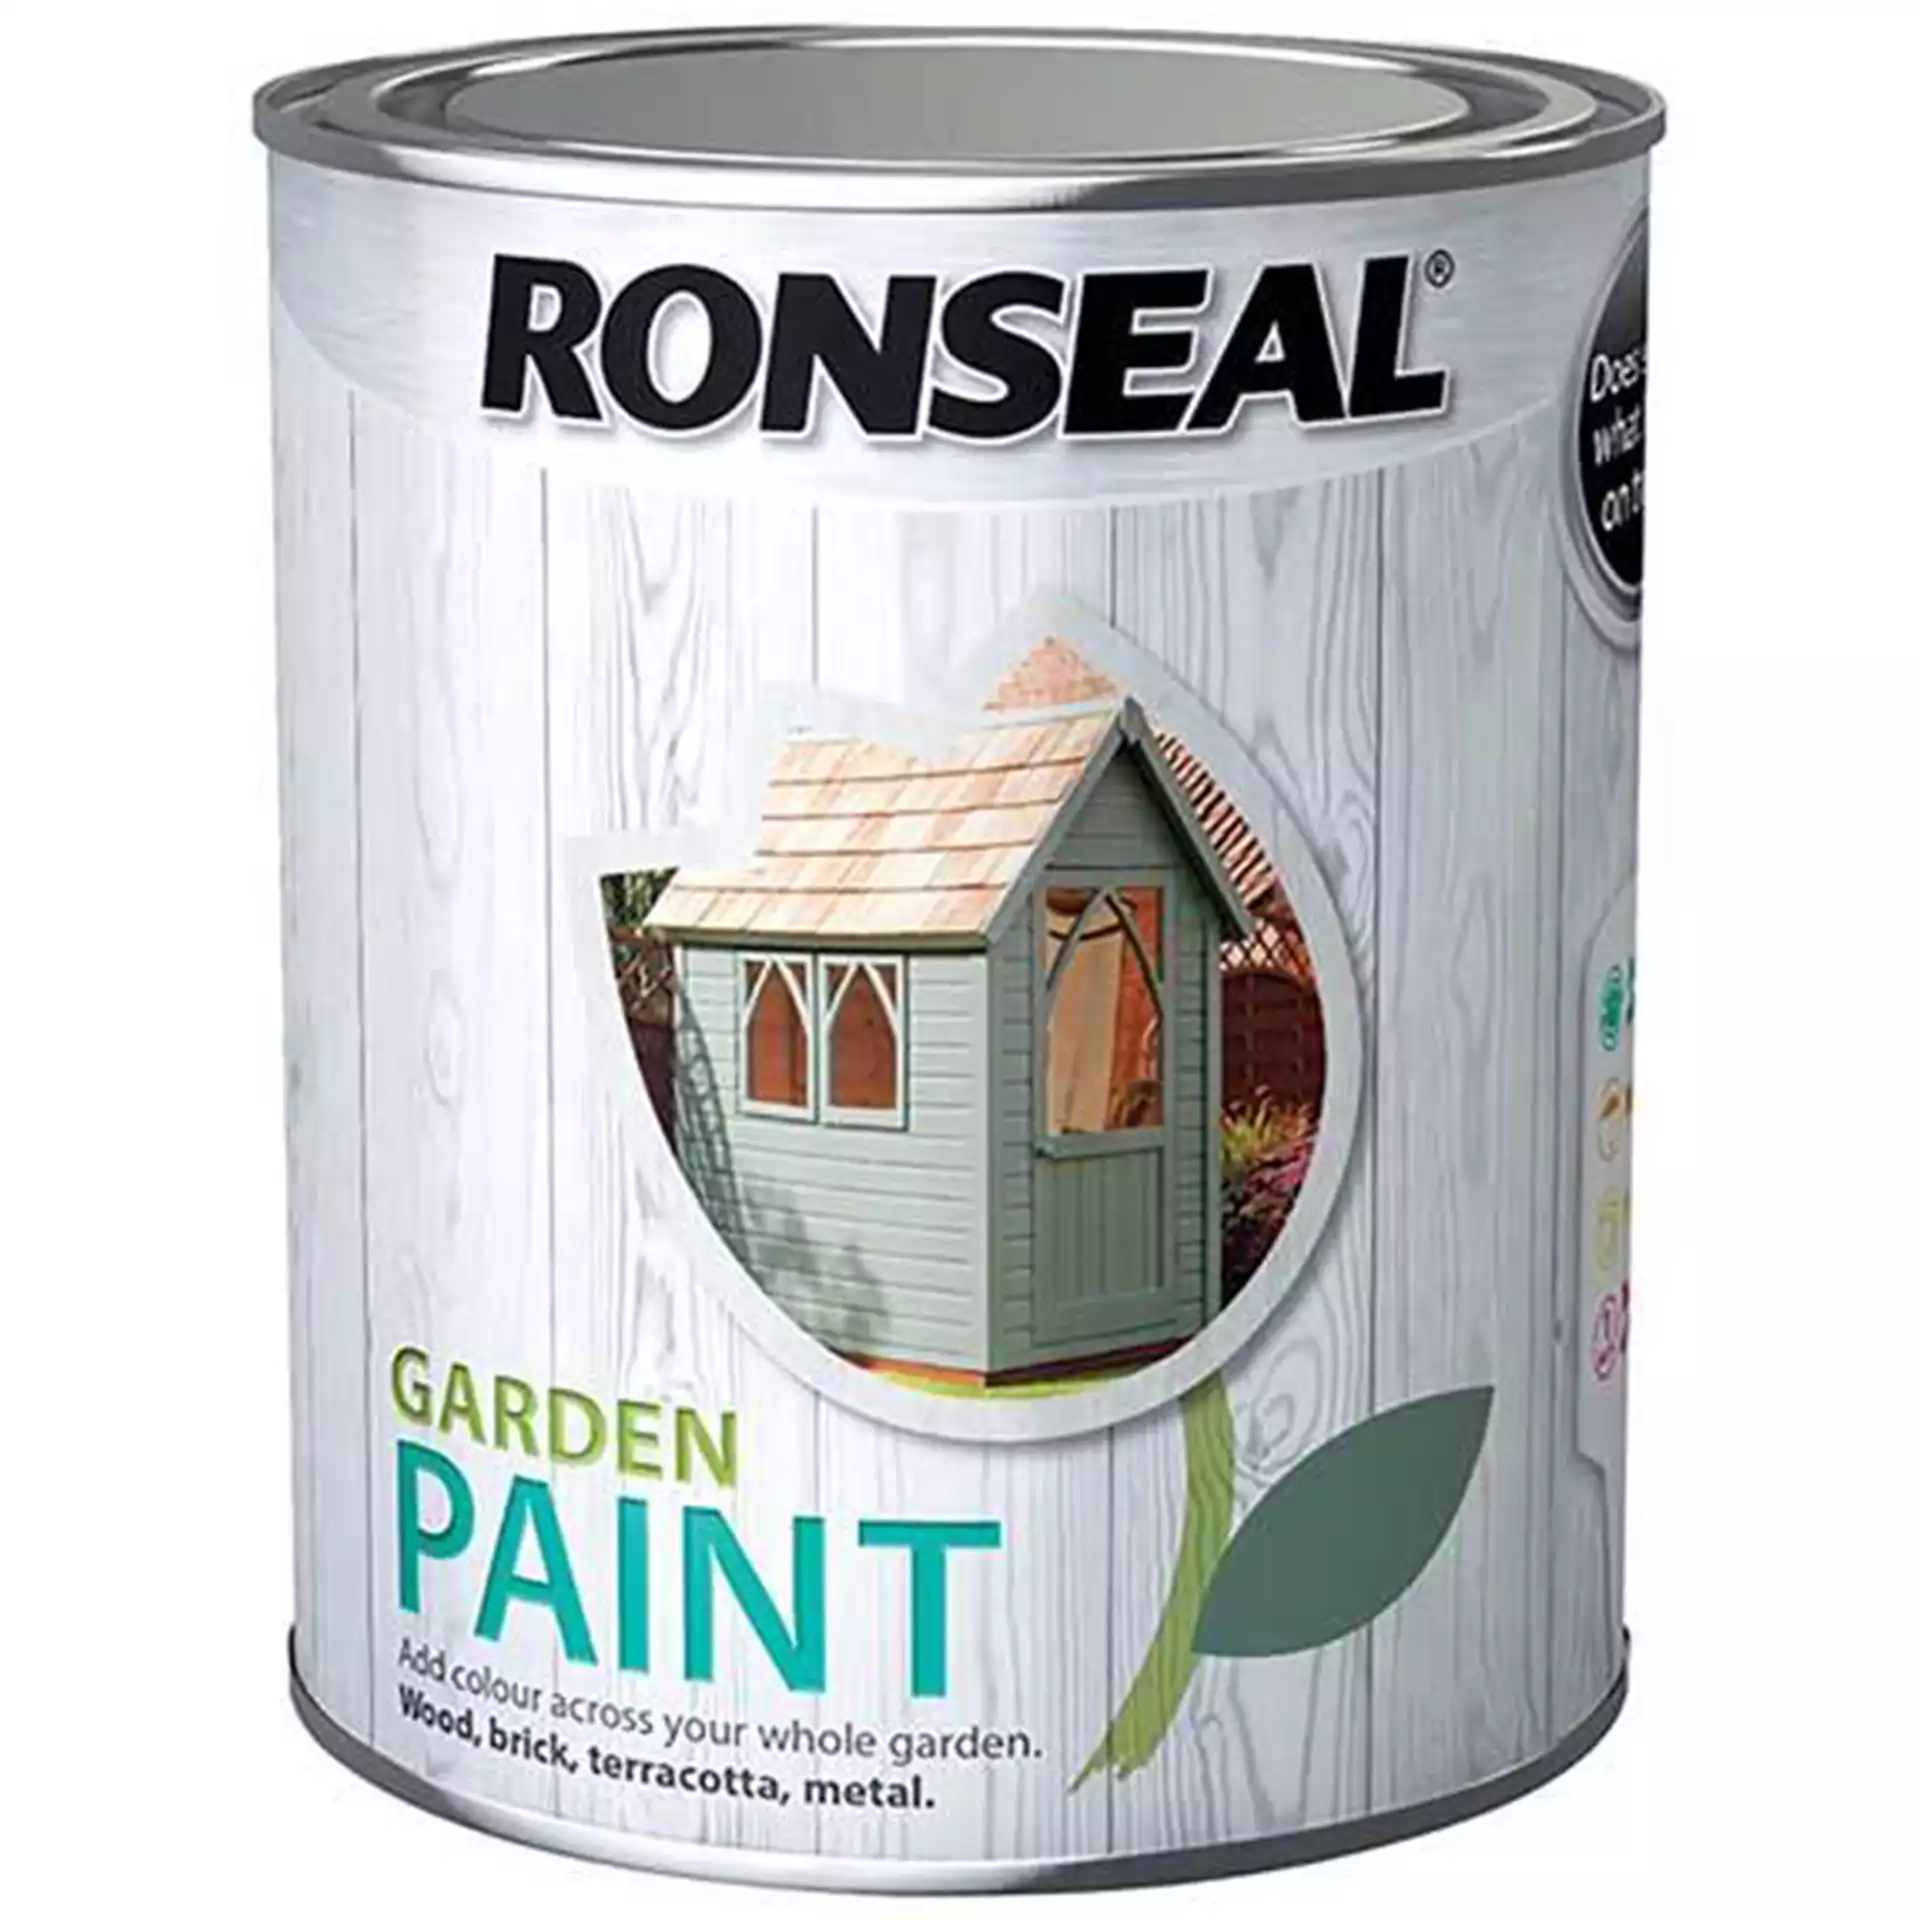 How To Correctly Dispose of Or Re-Use Your Paint - Owatrol Direct